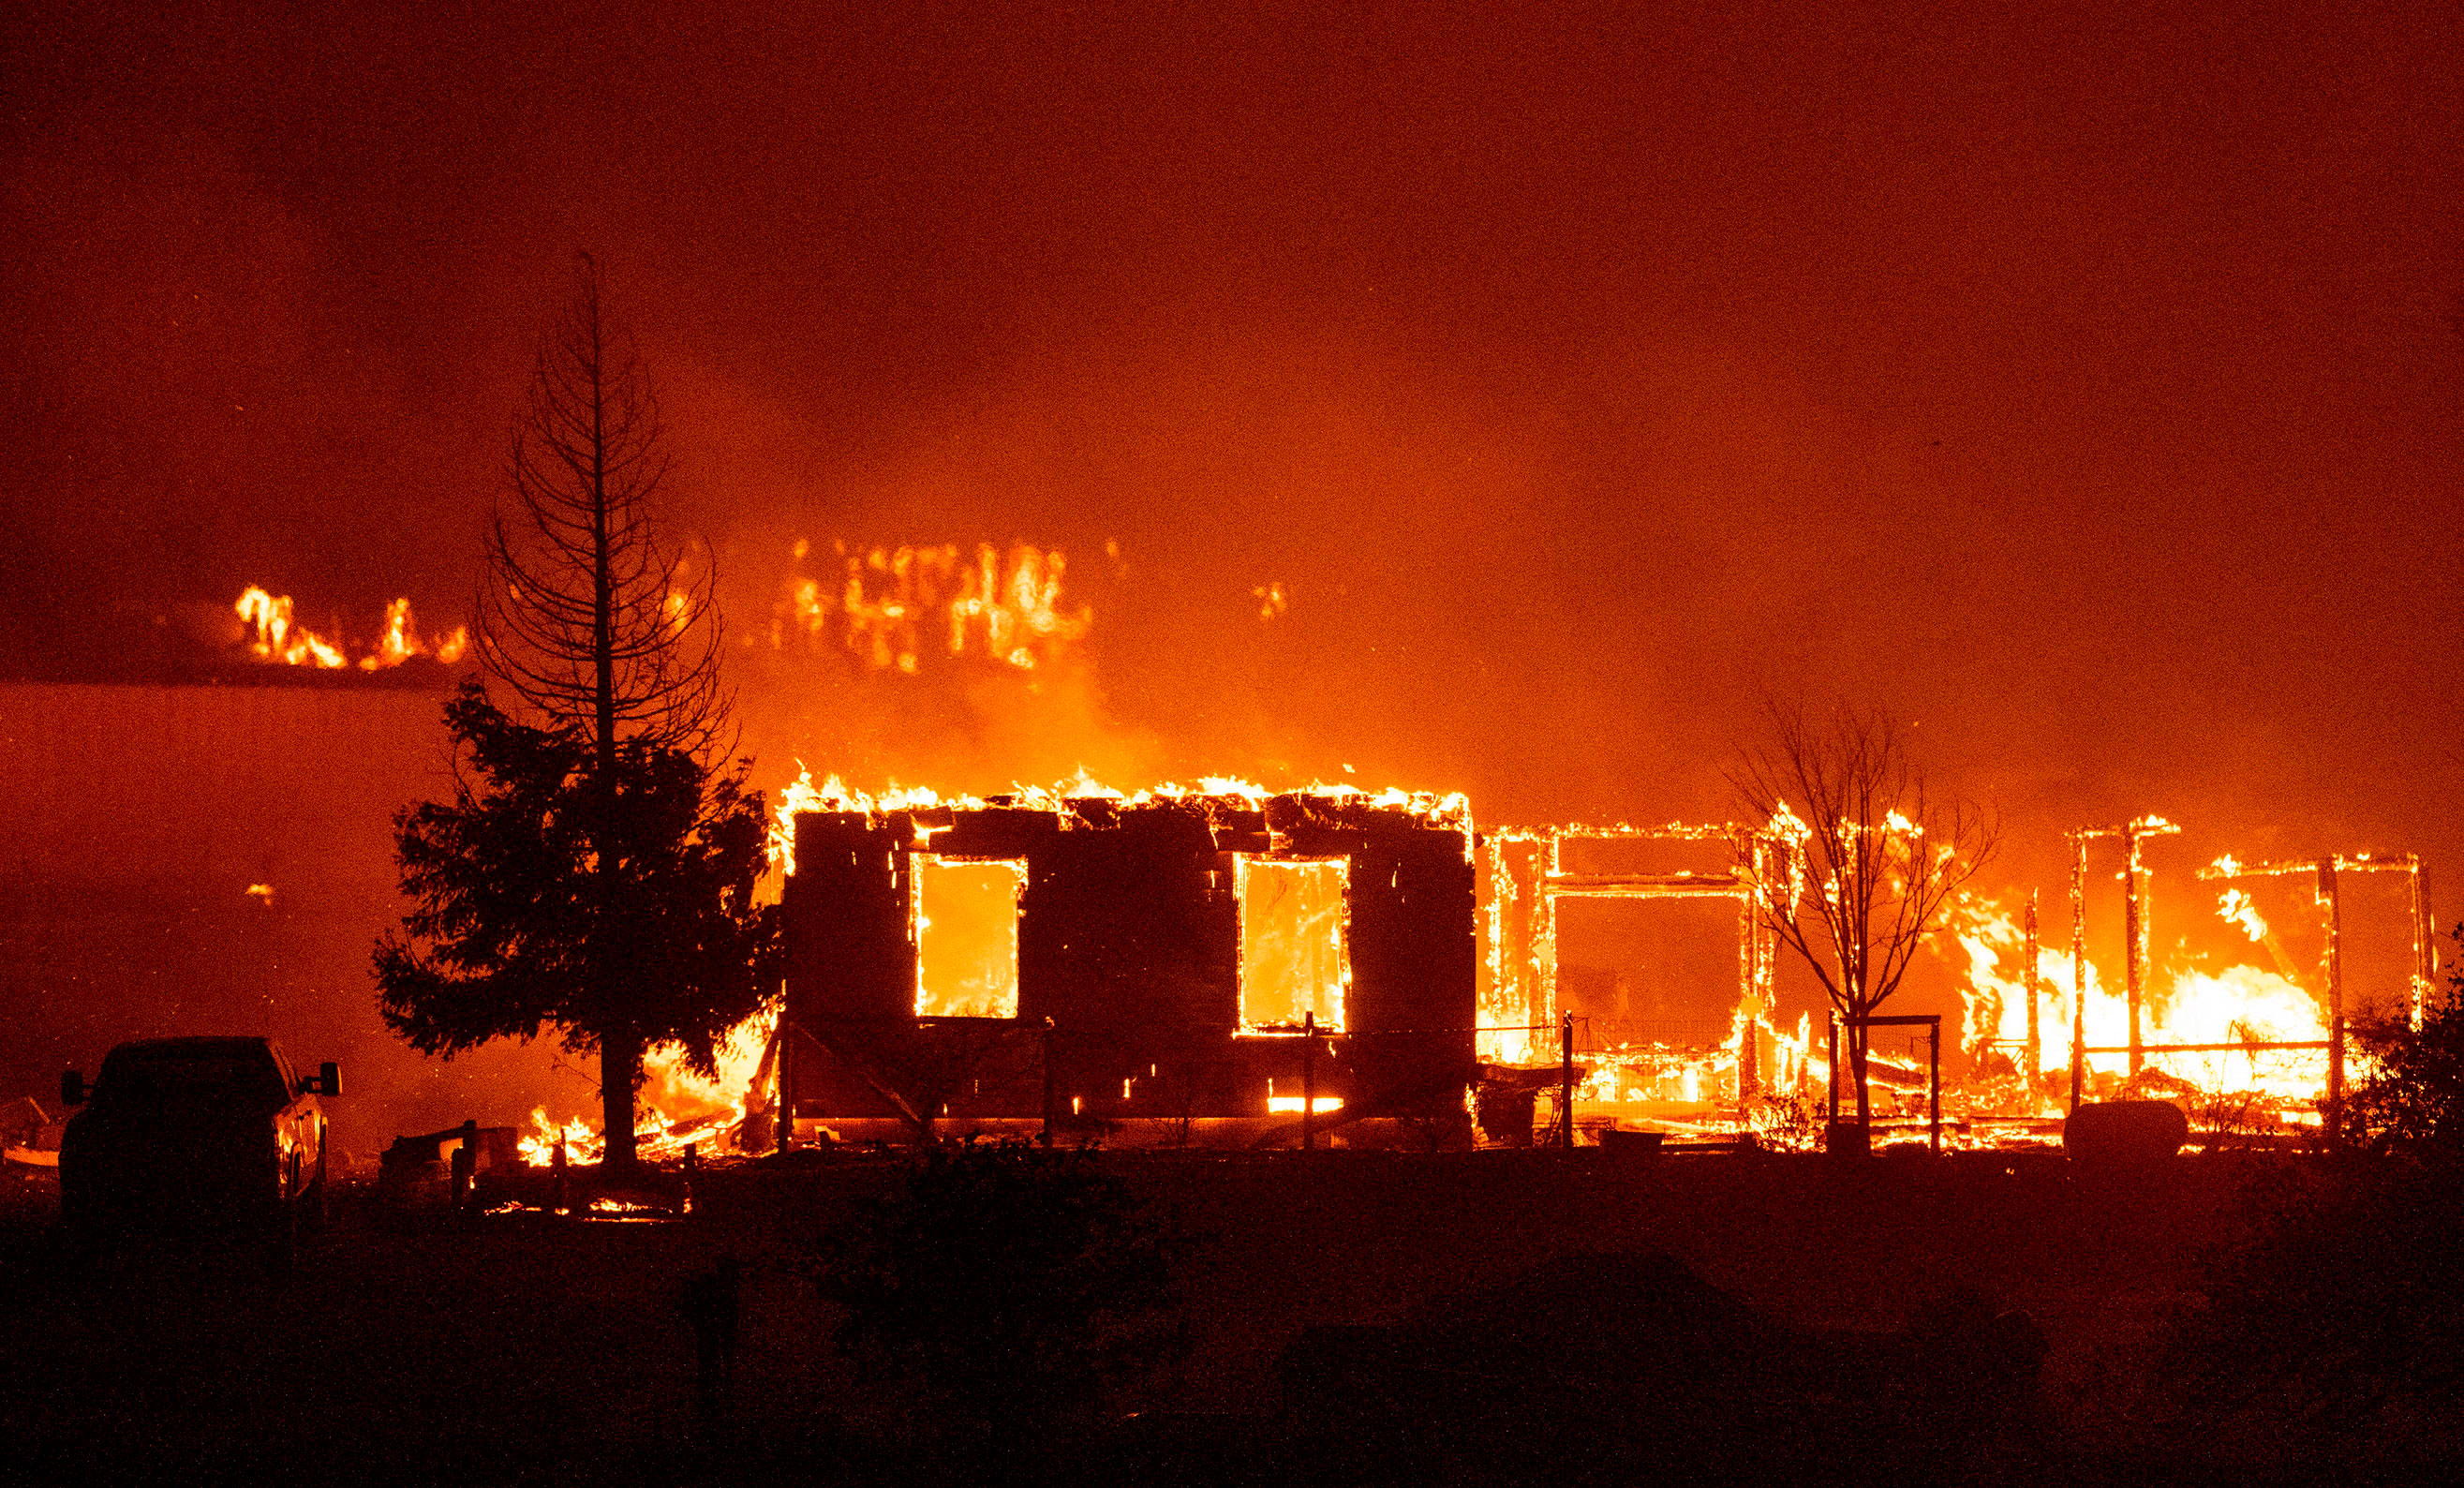 Homes are engulfed in flames in Vacaville, California during the LNU Lightning Complex fire on August 19, 2020.